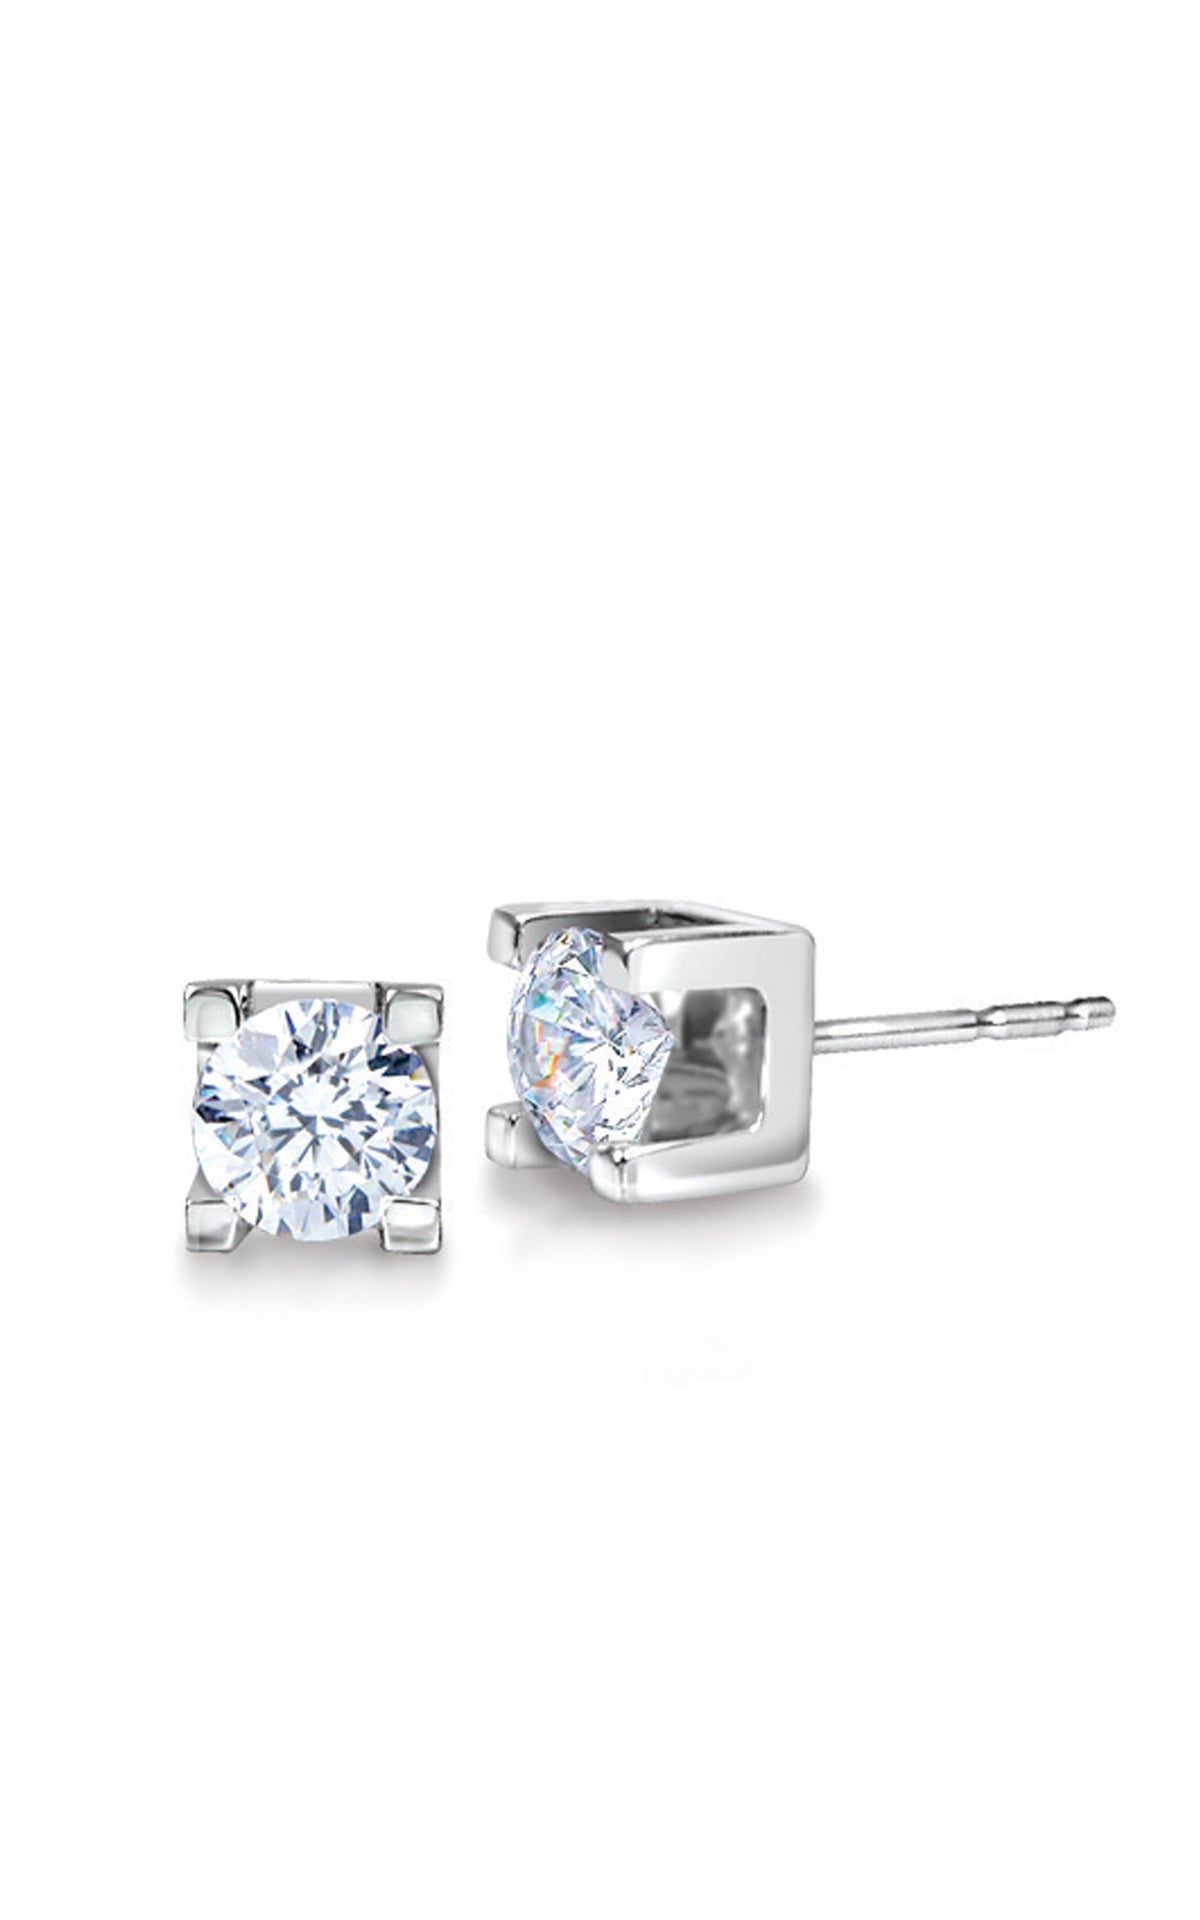 Canadian Diamond 0.25ct Solitaire Earrings in Four Claw Setting Set in 14K White Gold